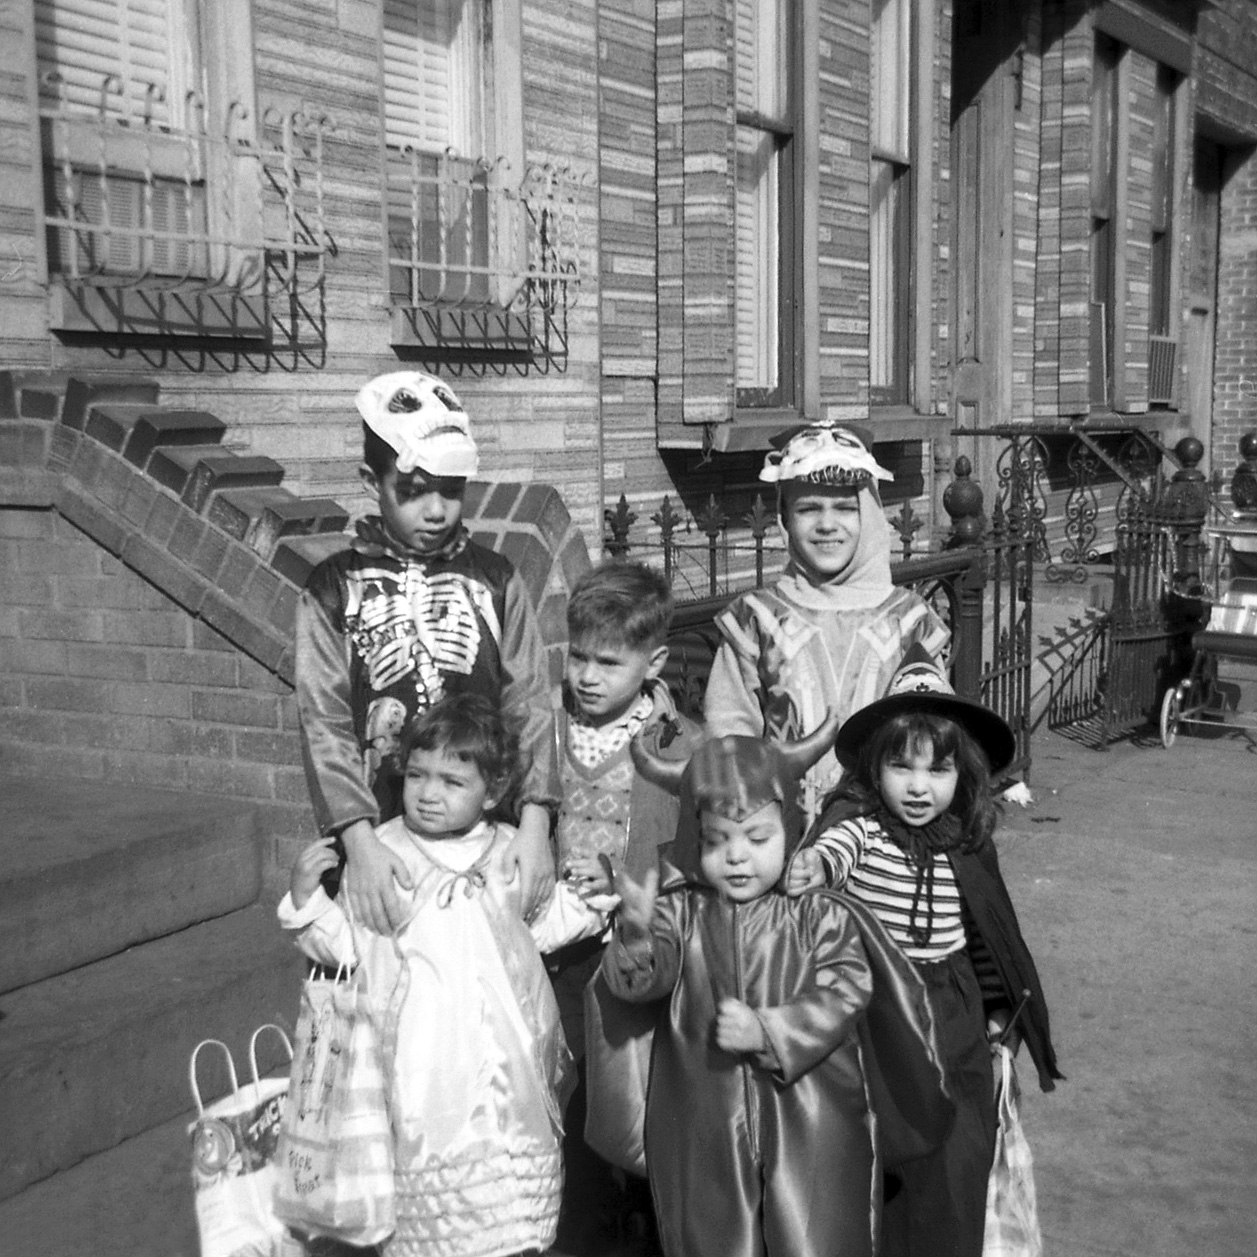 My sister (the witch), myself (devil), and several neighbors get all costumed up to go trick-or-treating on Hart Street in Brooklyn in 1965. Scanned from a B&W negative. View full size.